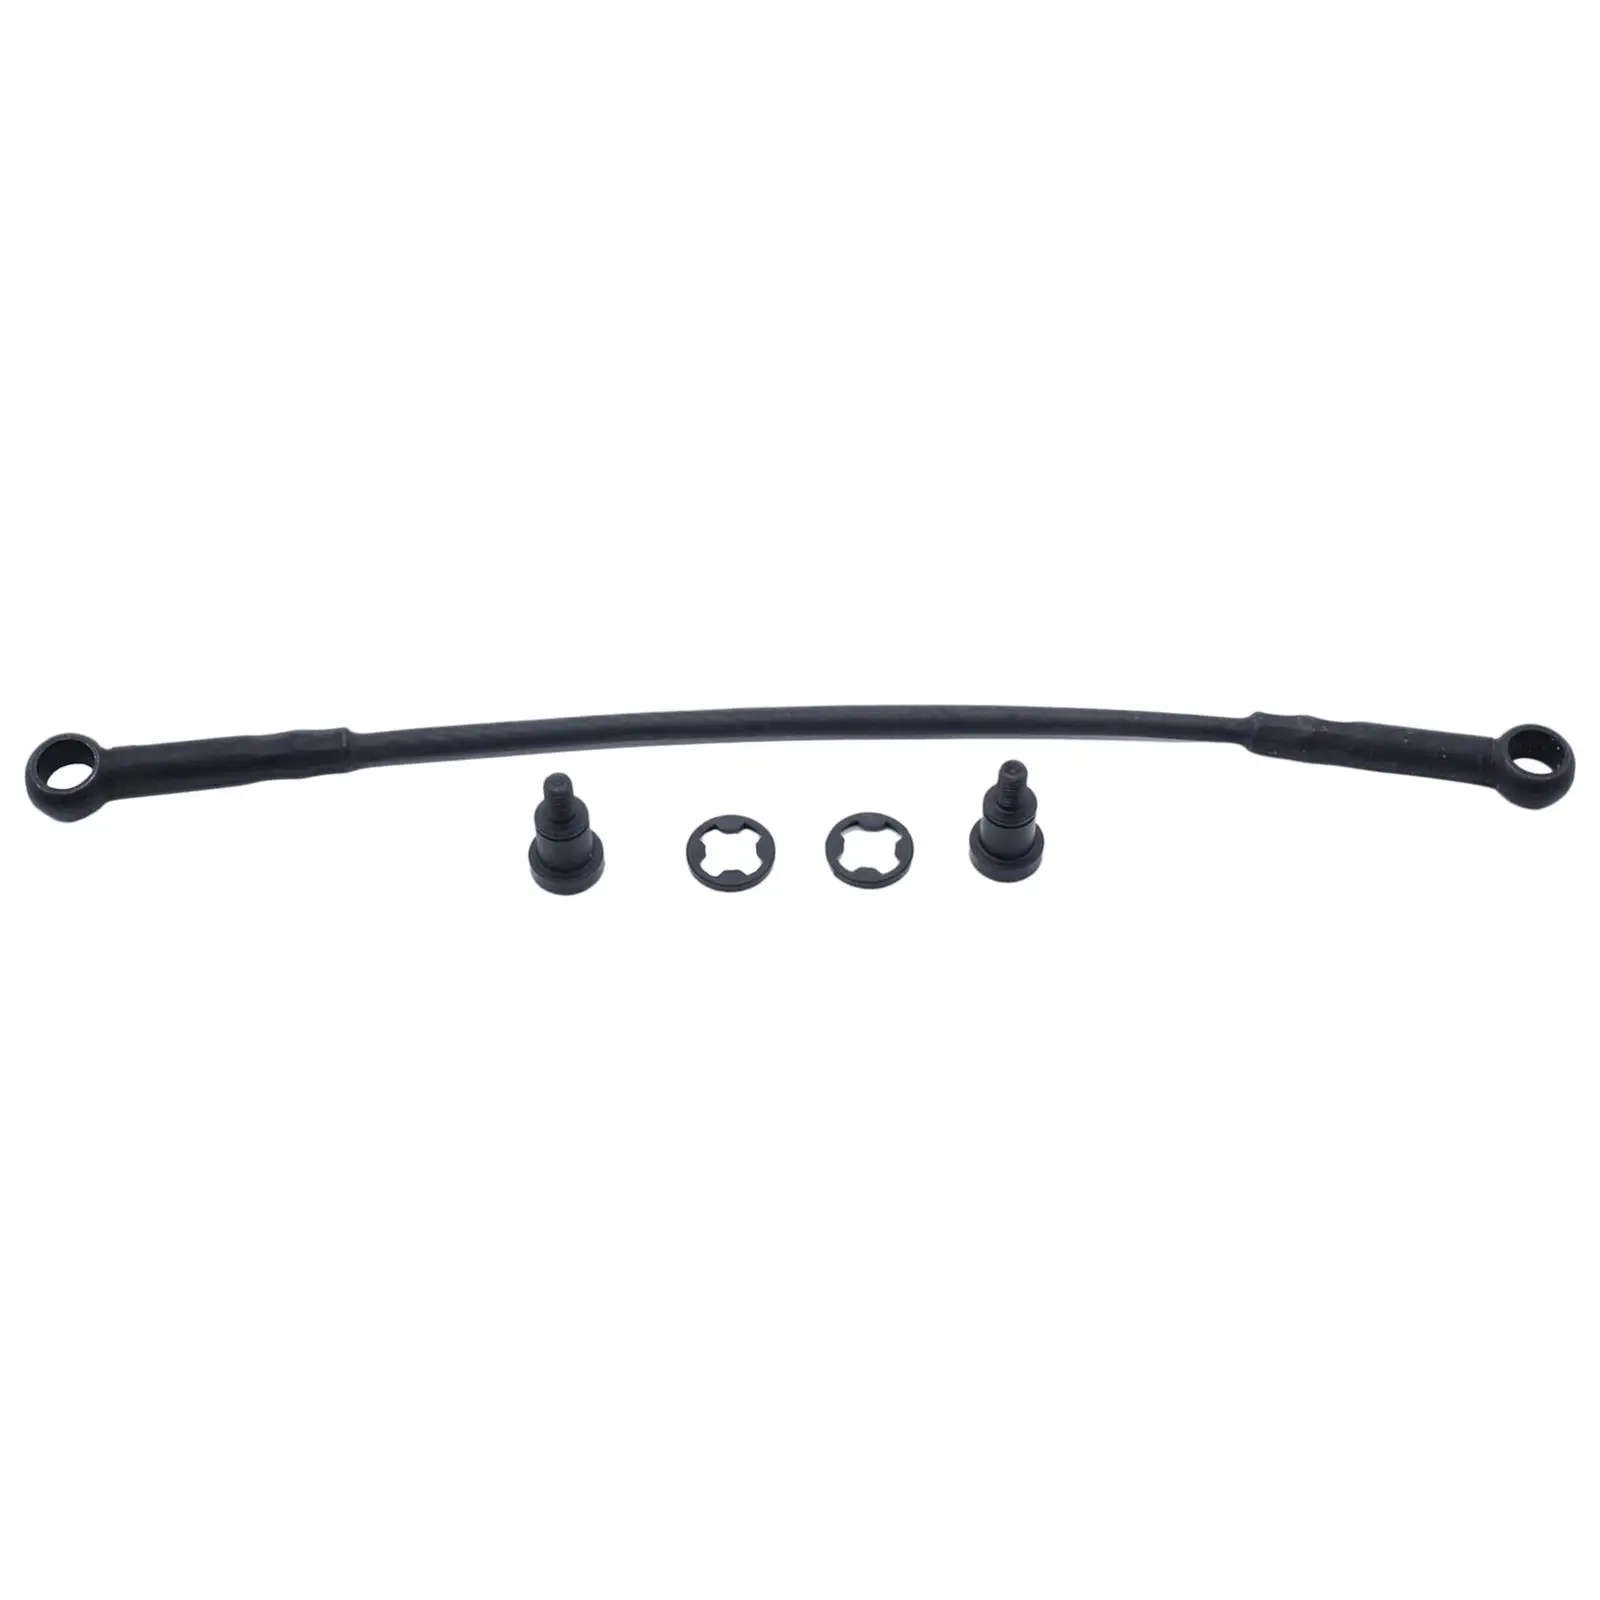 Rear Tailgate Cable 74867Sjca00 Tail Gate Replace for Ridgeline